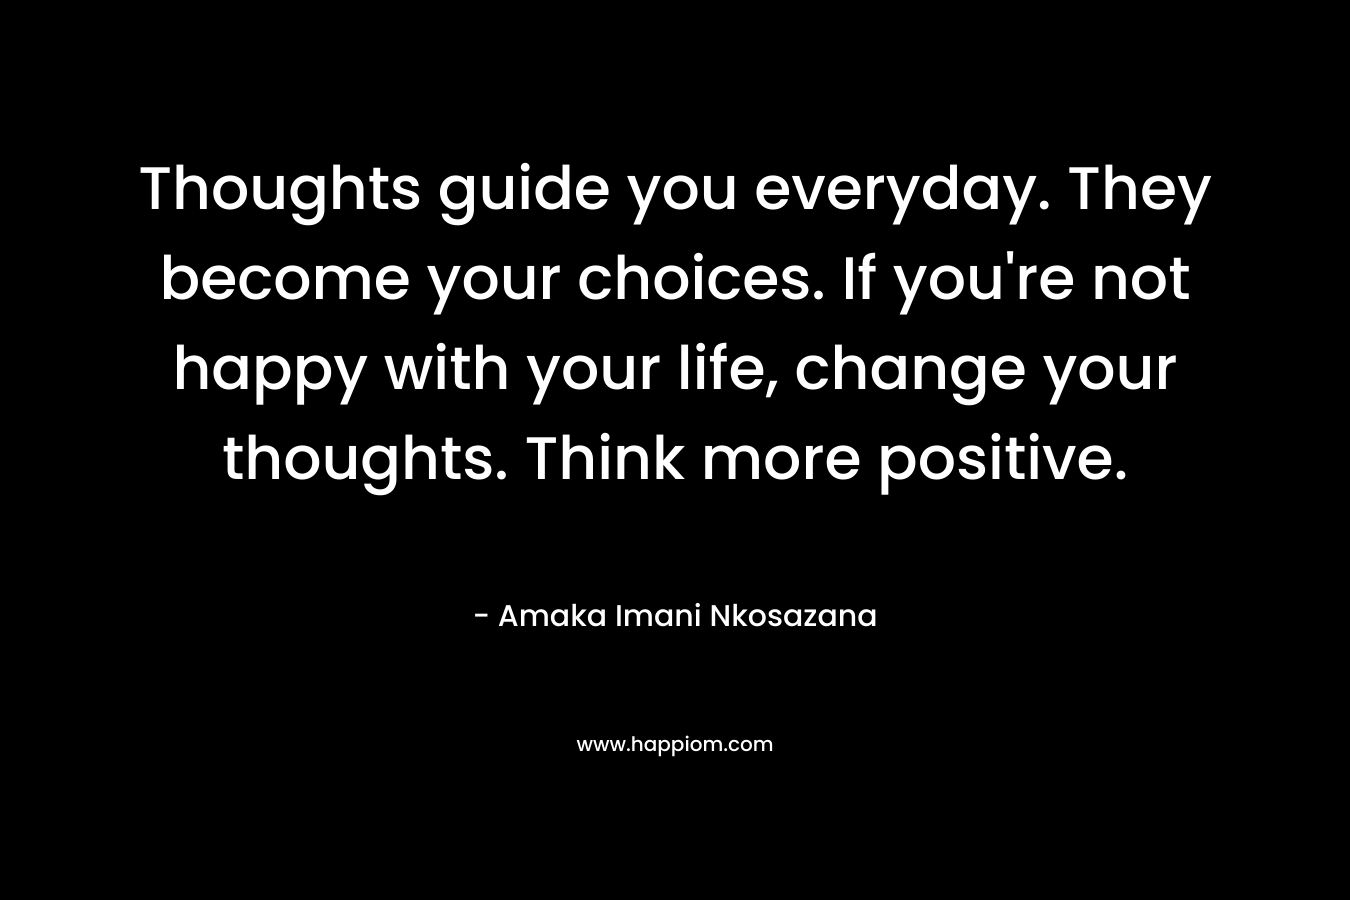 Thoughts guide you everyday. They become your choices. If you're not happy with your life, change your thoughts. Think more positive.